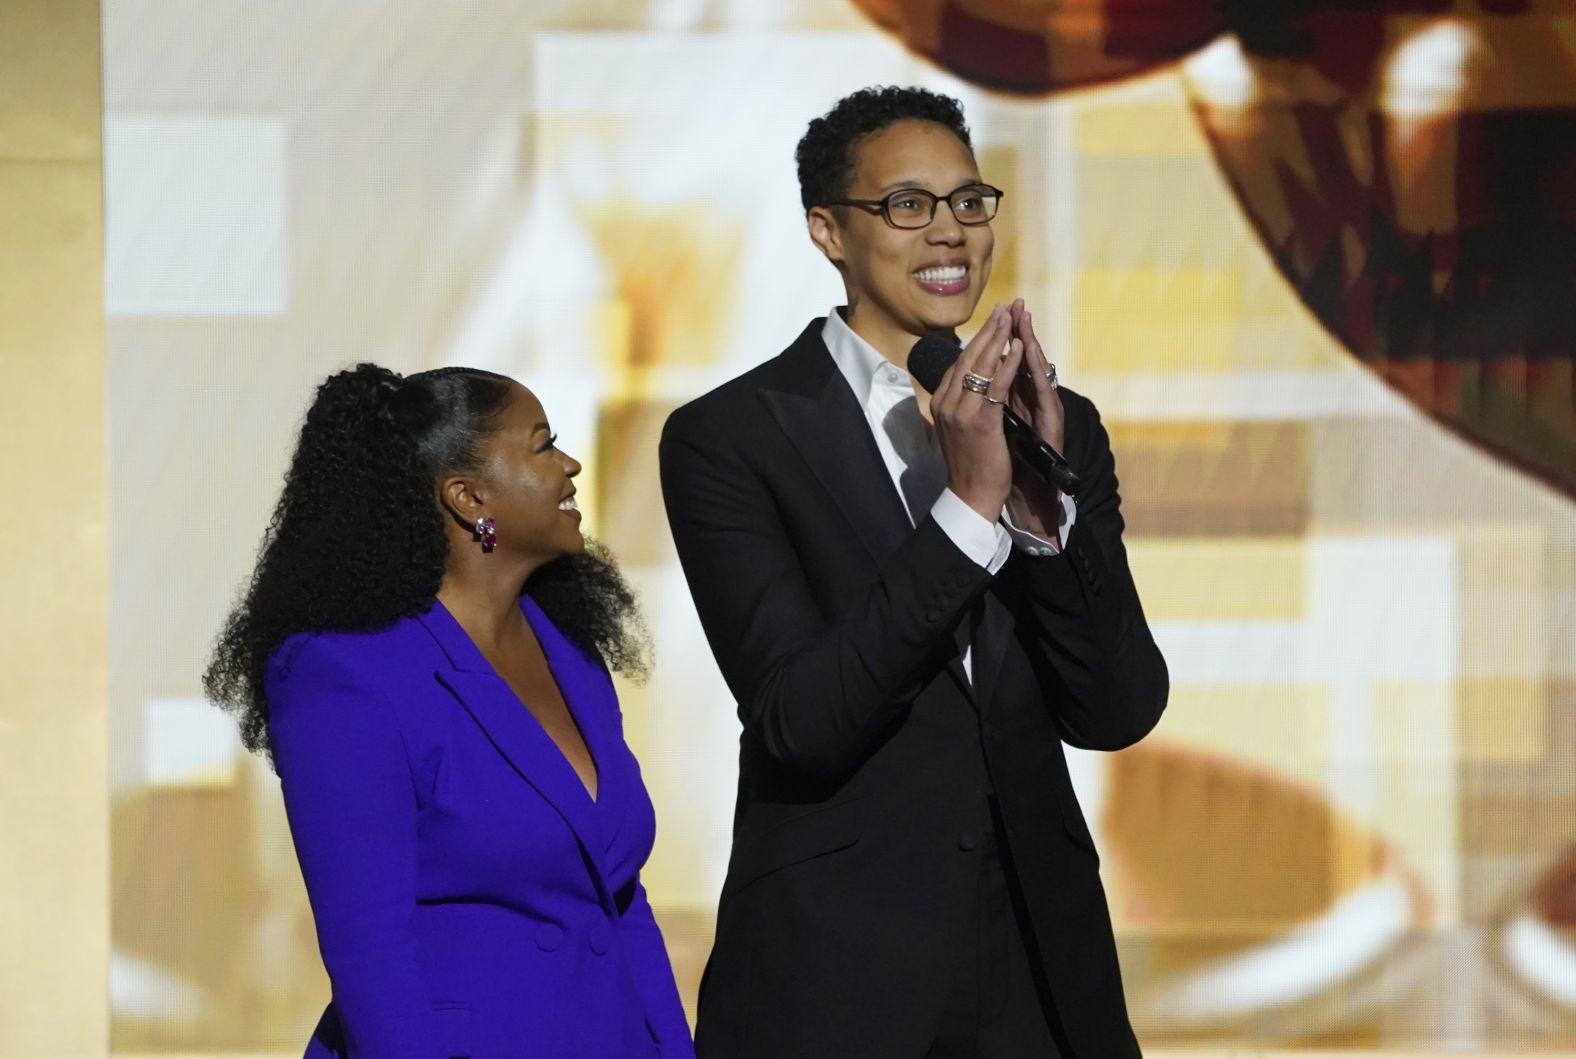 Griner makes a <a href="index.php?page=&url=https%3A%2F%2Fwww.cnn.com%2Fvideos%2Fus%2F2023%2F02%2F26%2Fbrittney-griner-naacp-image-awards-speech-russia-ukraine-prisoners-cp-orig-kj.cnn" target="_blank">surprise appearance</a> at the NAACP Image Awards in February 2023. She received a standing ovation as she took the stage.